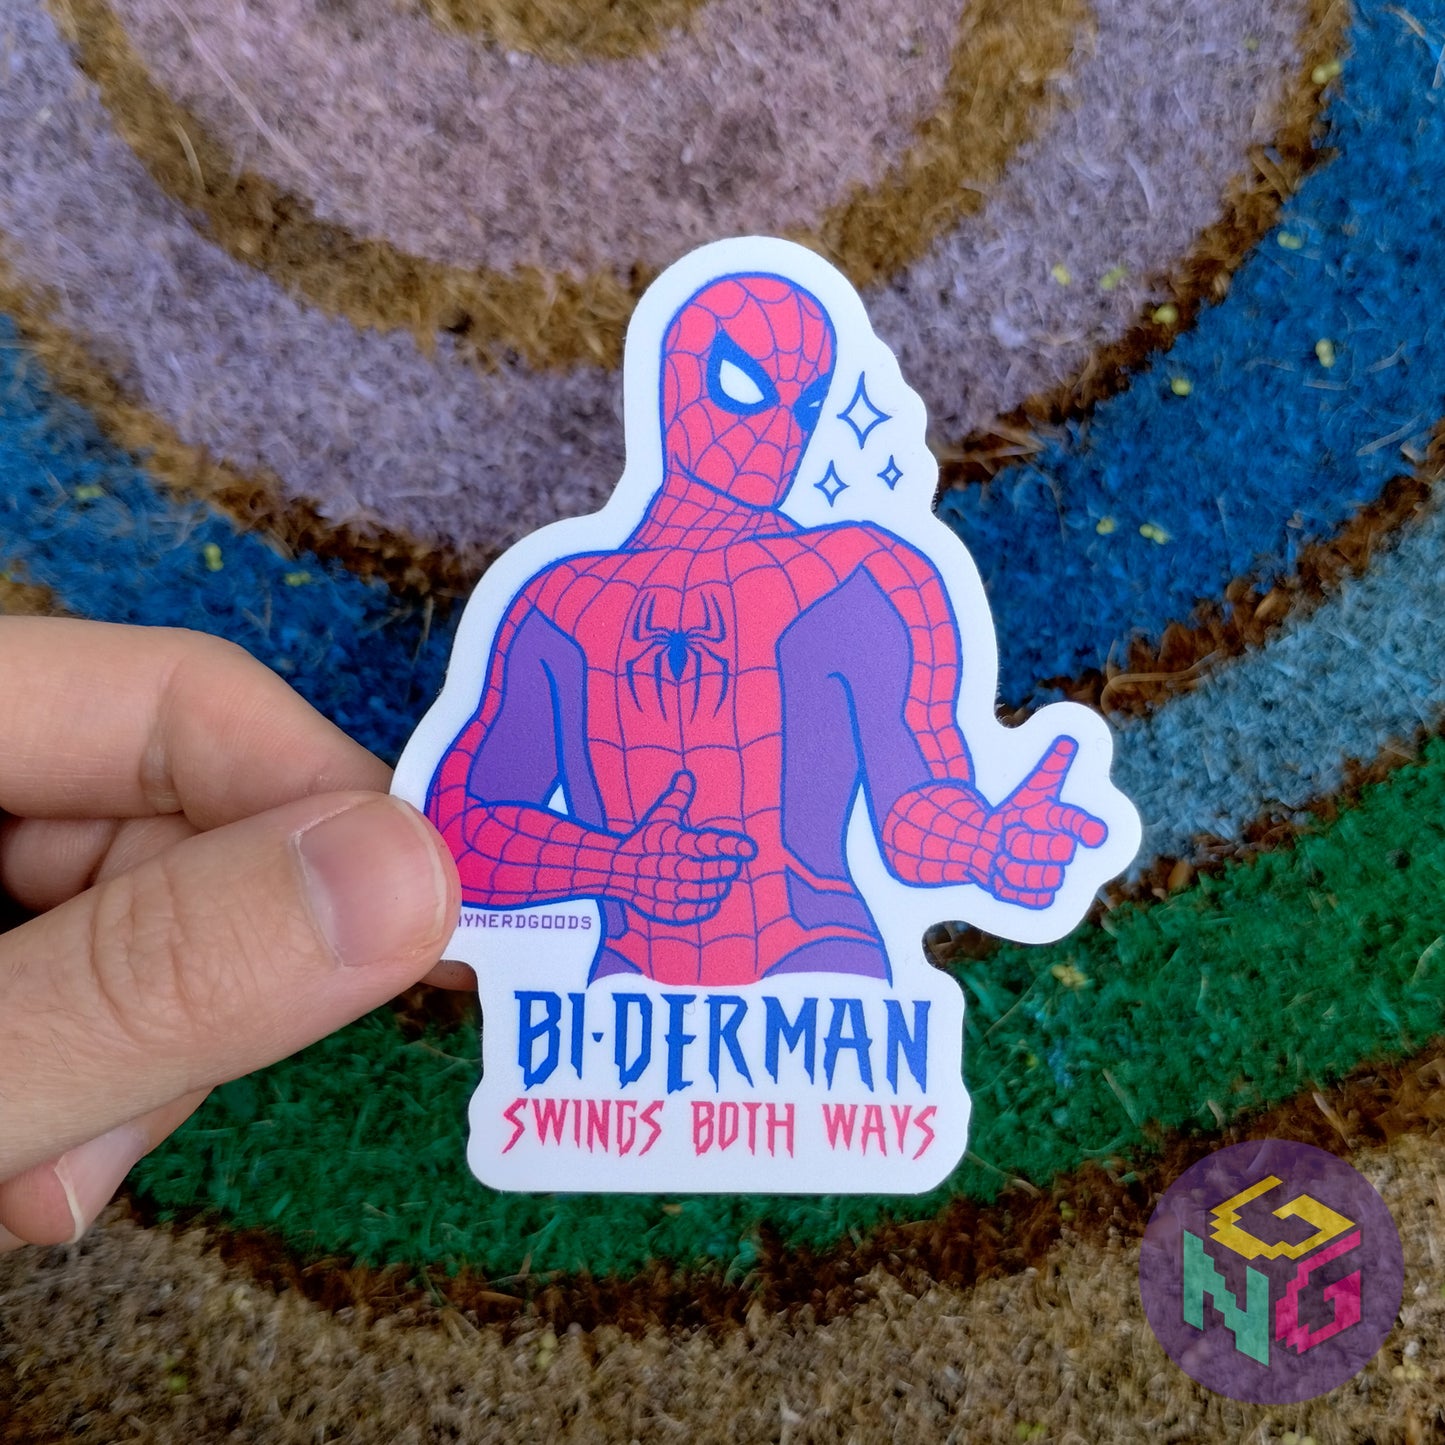 biderman matte sticker held in a hand in front of a rainbow welcome mat